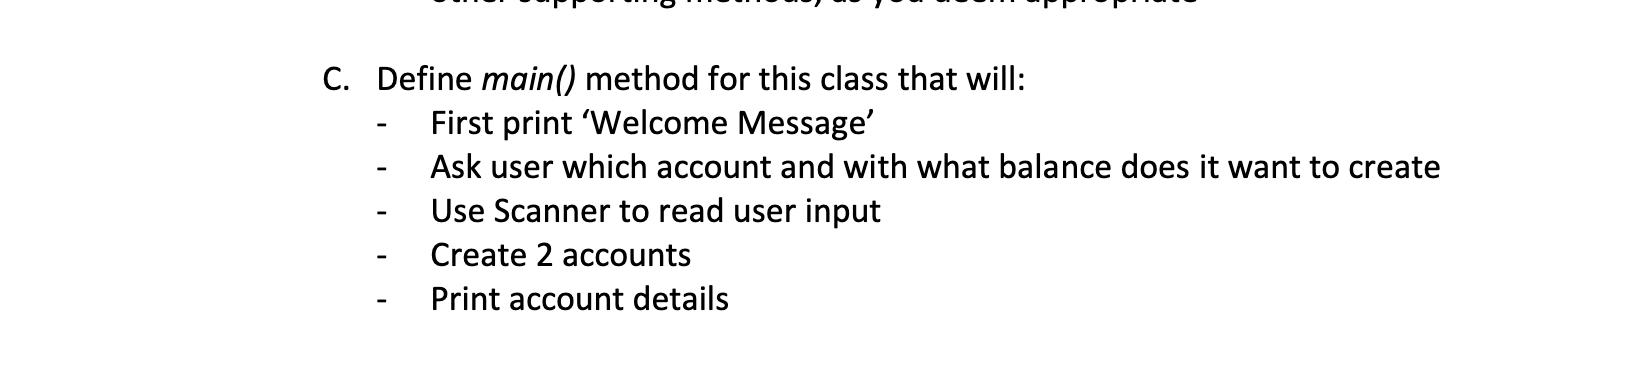 C. Define main() method for this class that will: First print 'Welcome Message' Ask user which account and